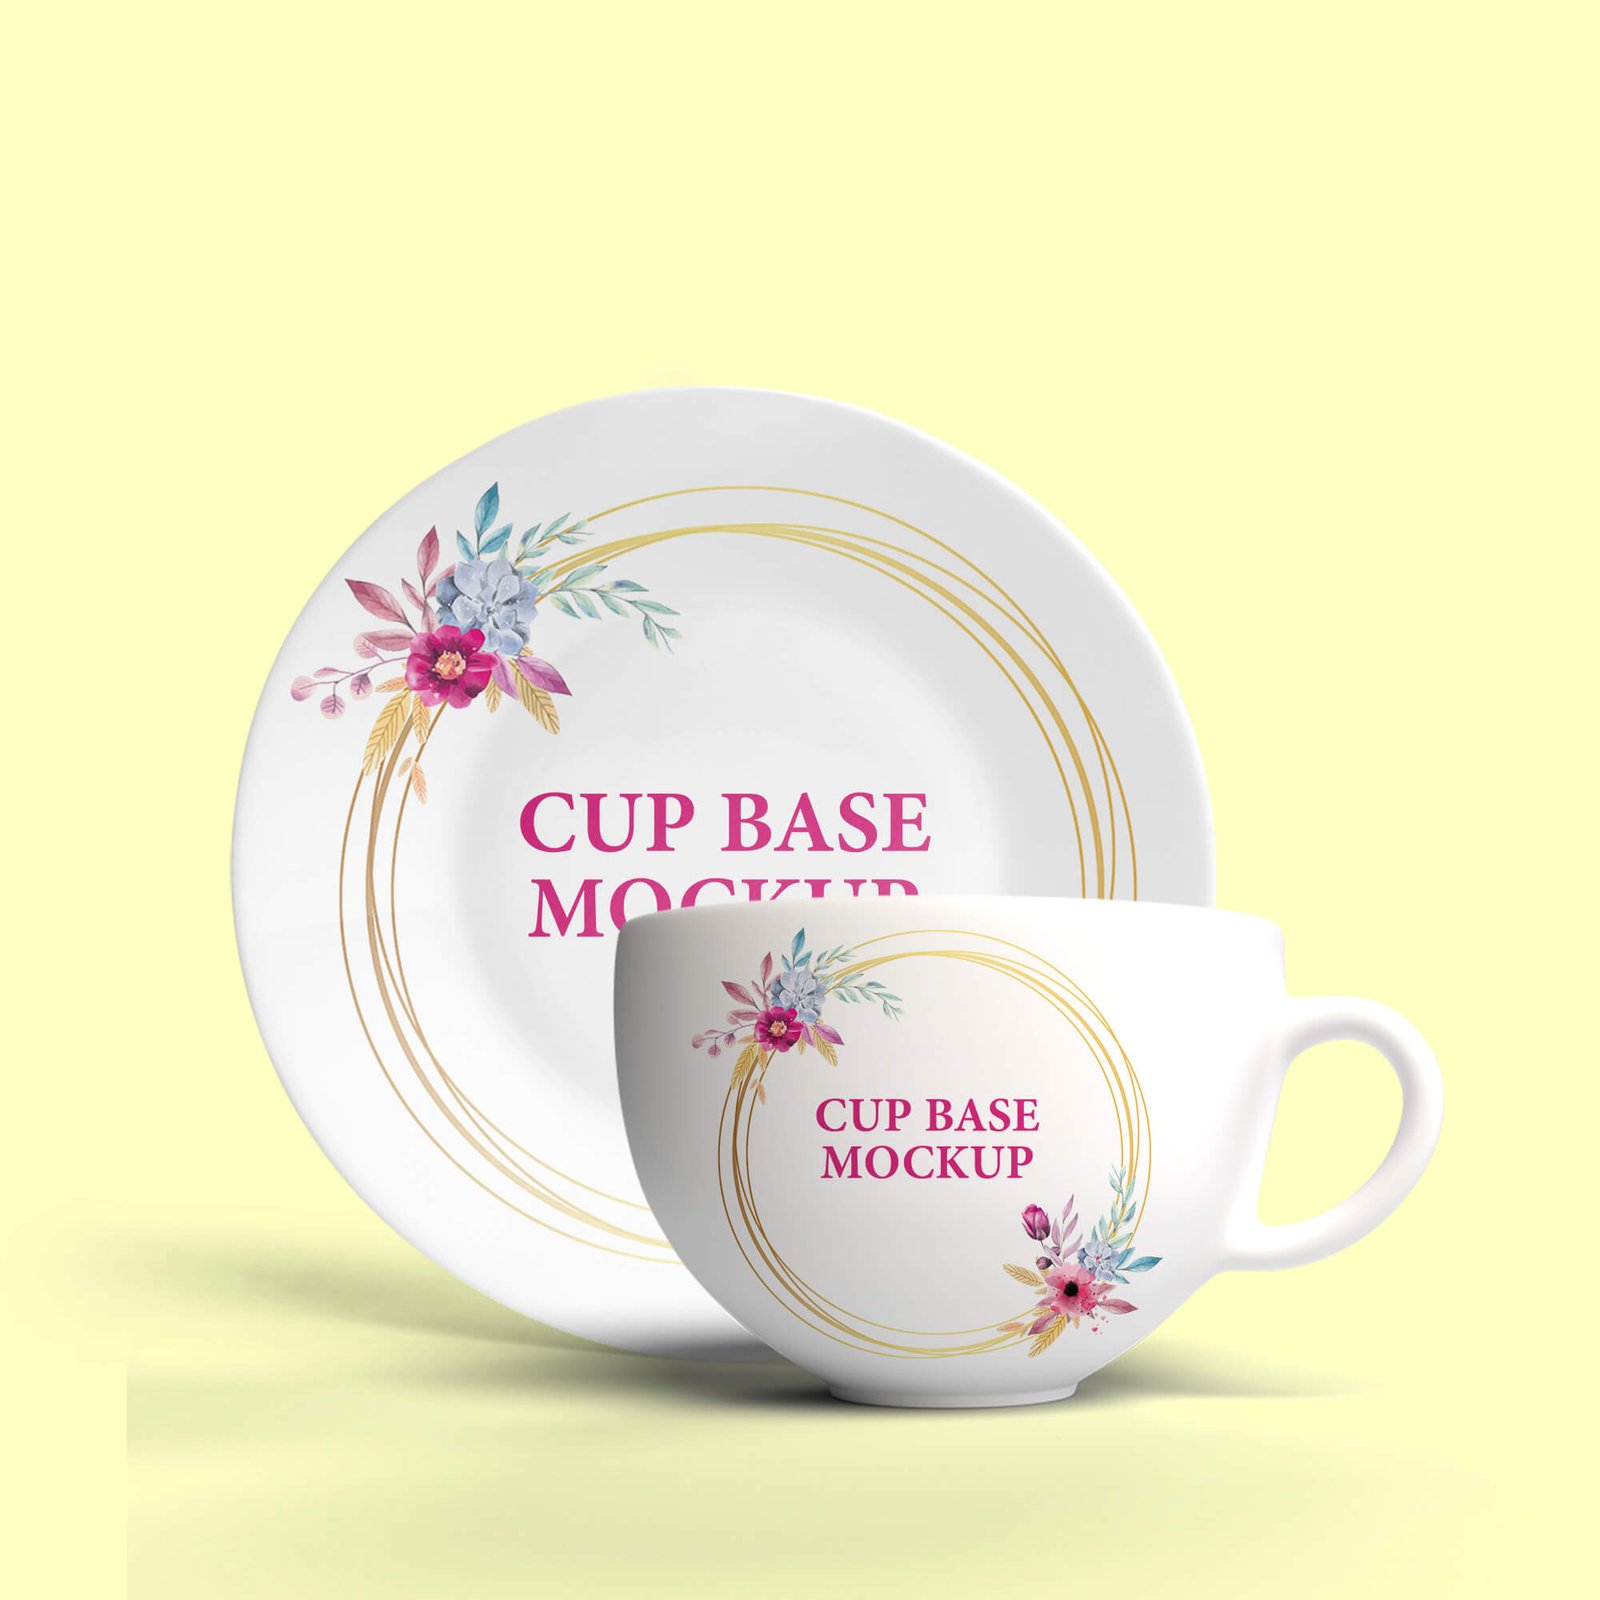 Design Free Cup Base Mockup PSD Template